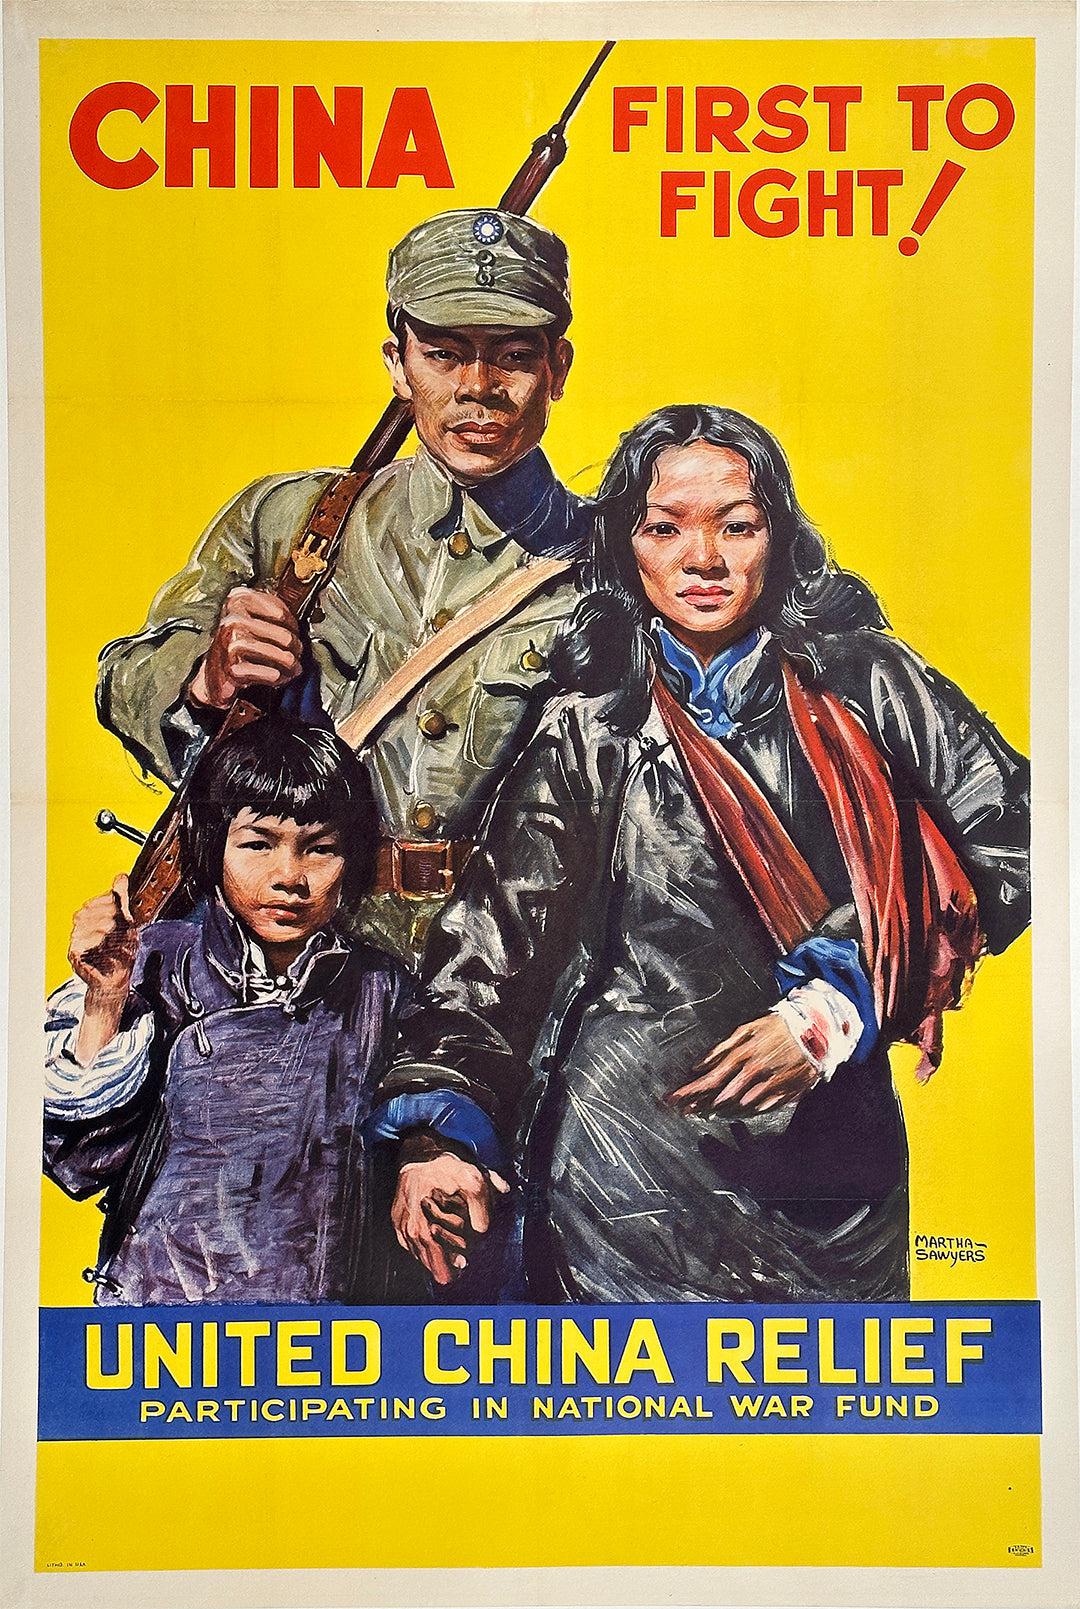 Original Vintage China First to Fight WWII Poster by Martha Sawyers 1942 United China Relief